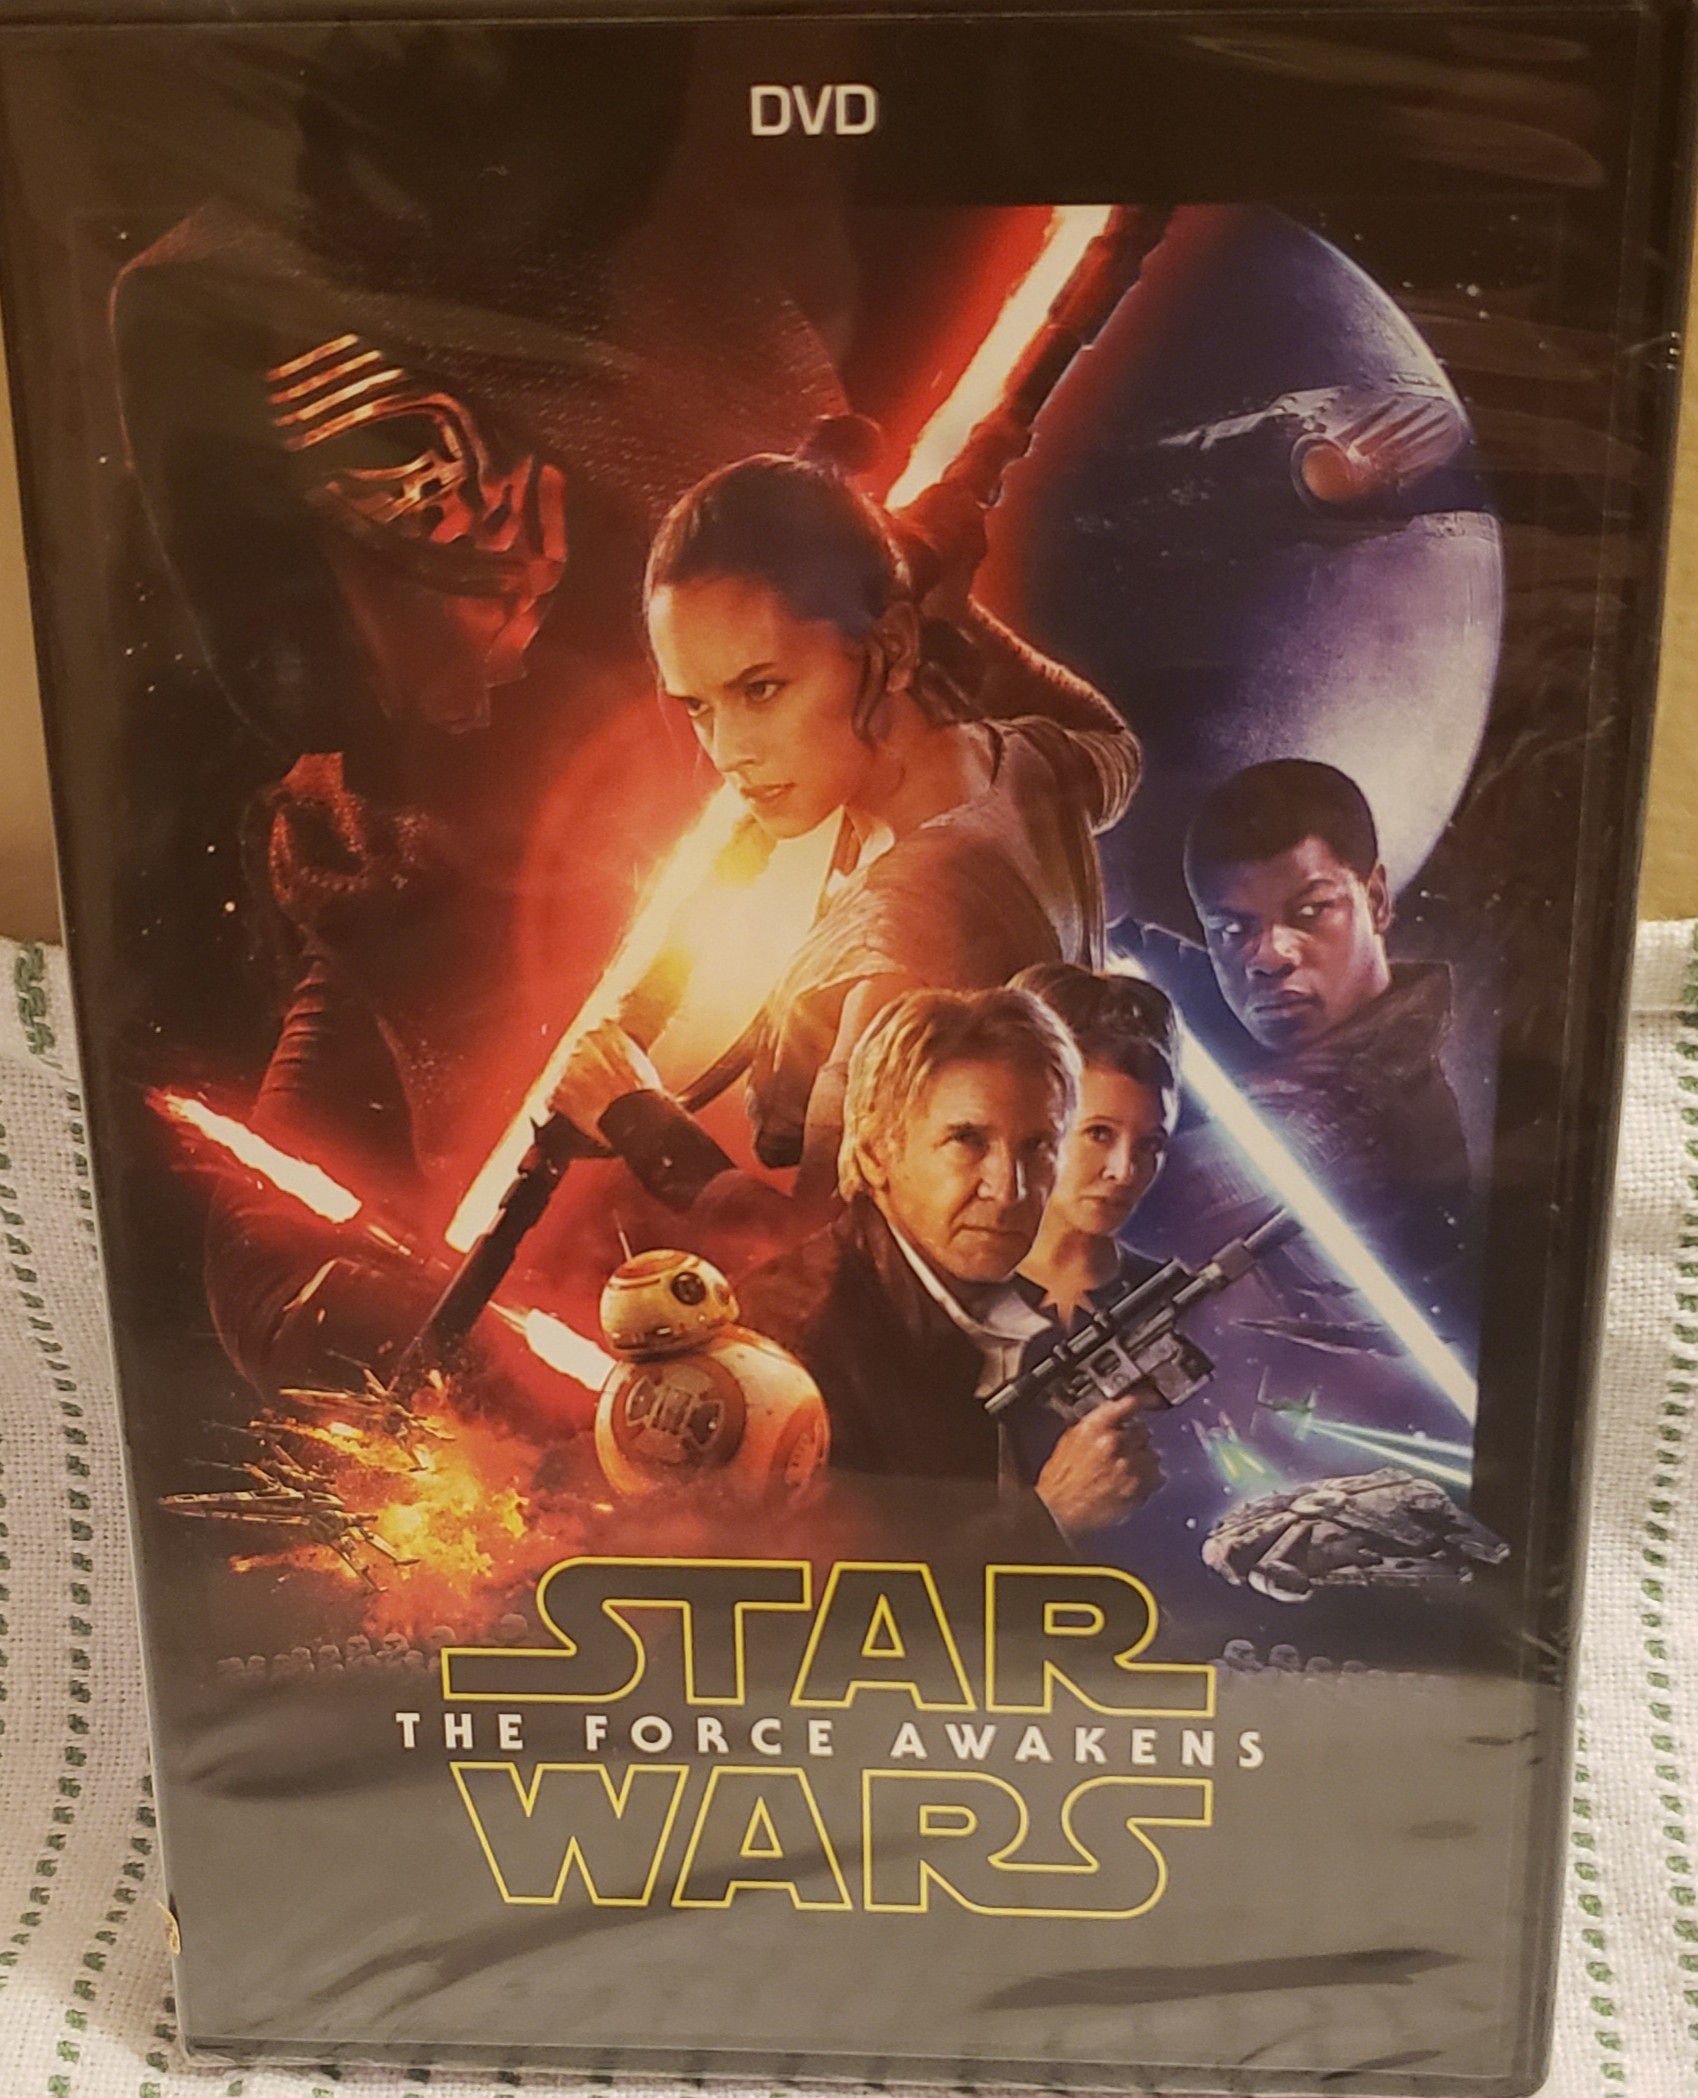 Star Wars-The Force Awakens DVD with DMR points